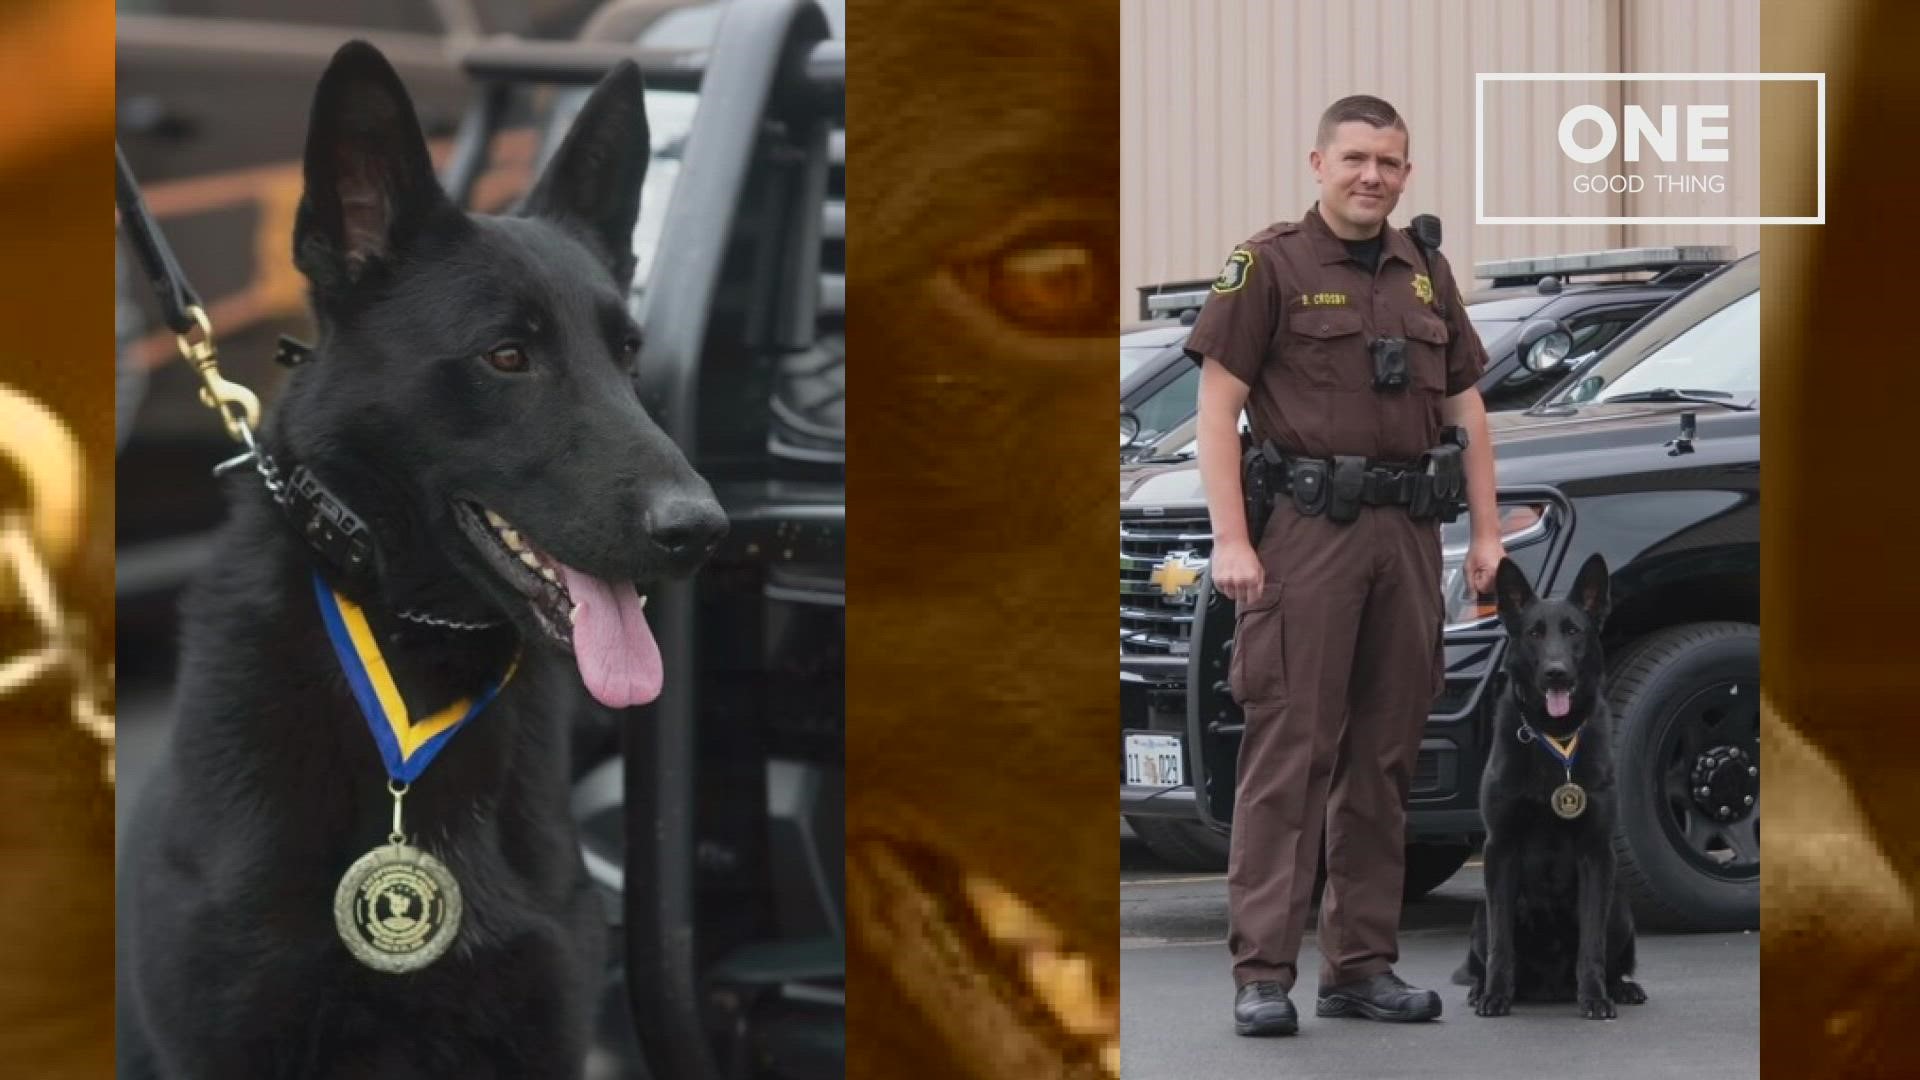 The West Michigan K9 and his handler were awarded for their service in a 2020 incident that saved a young girl.